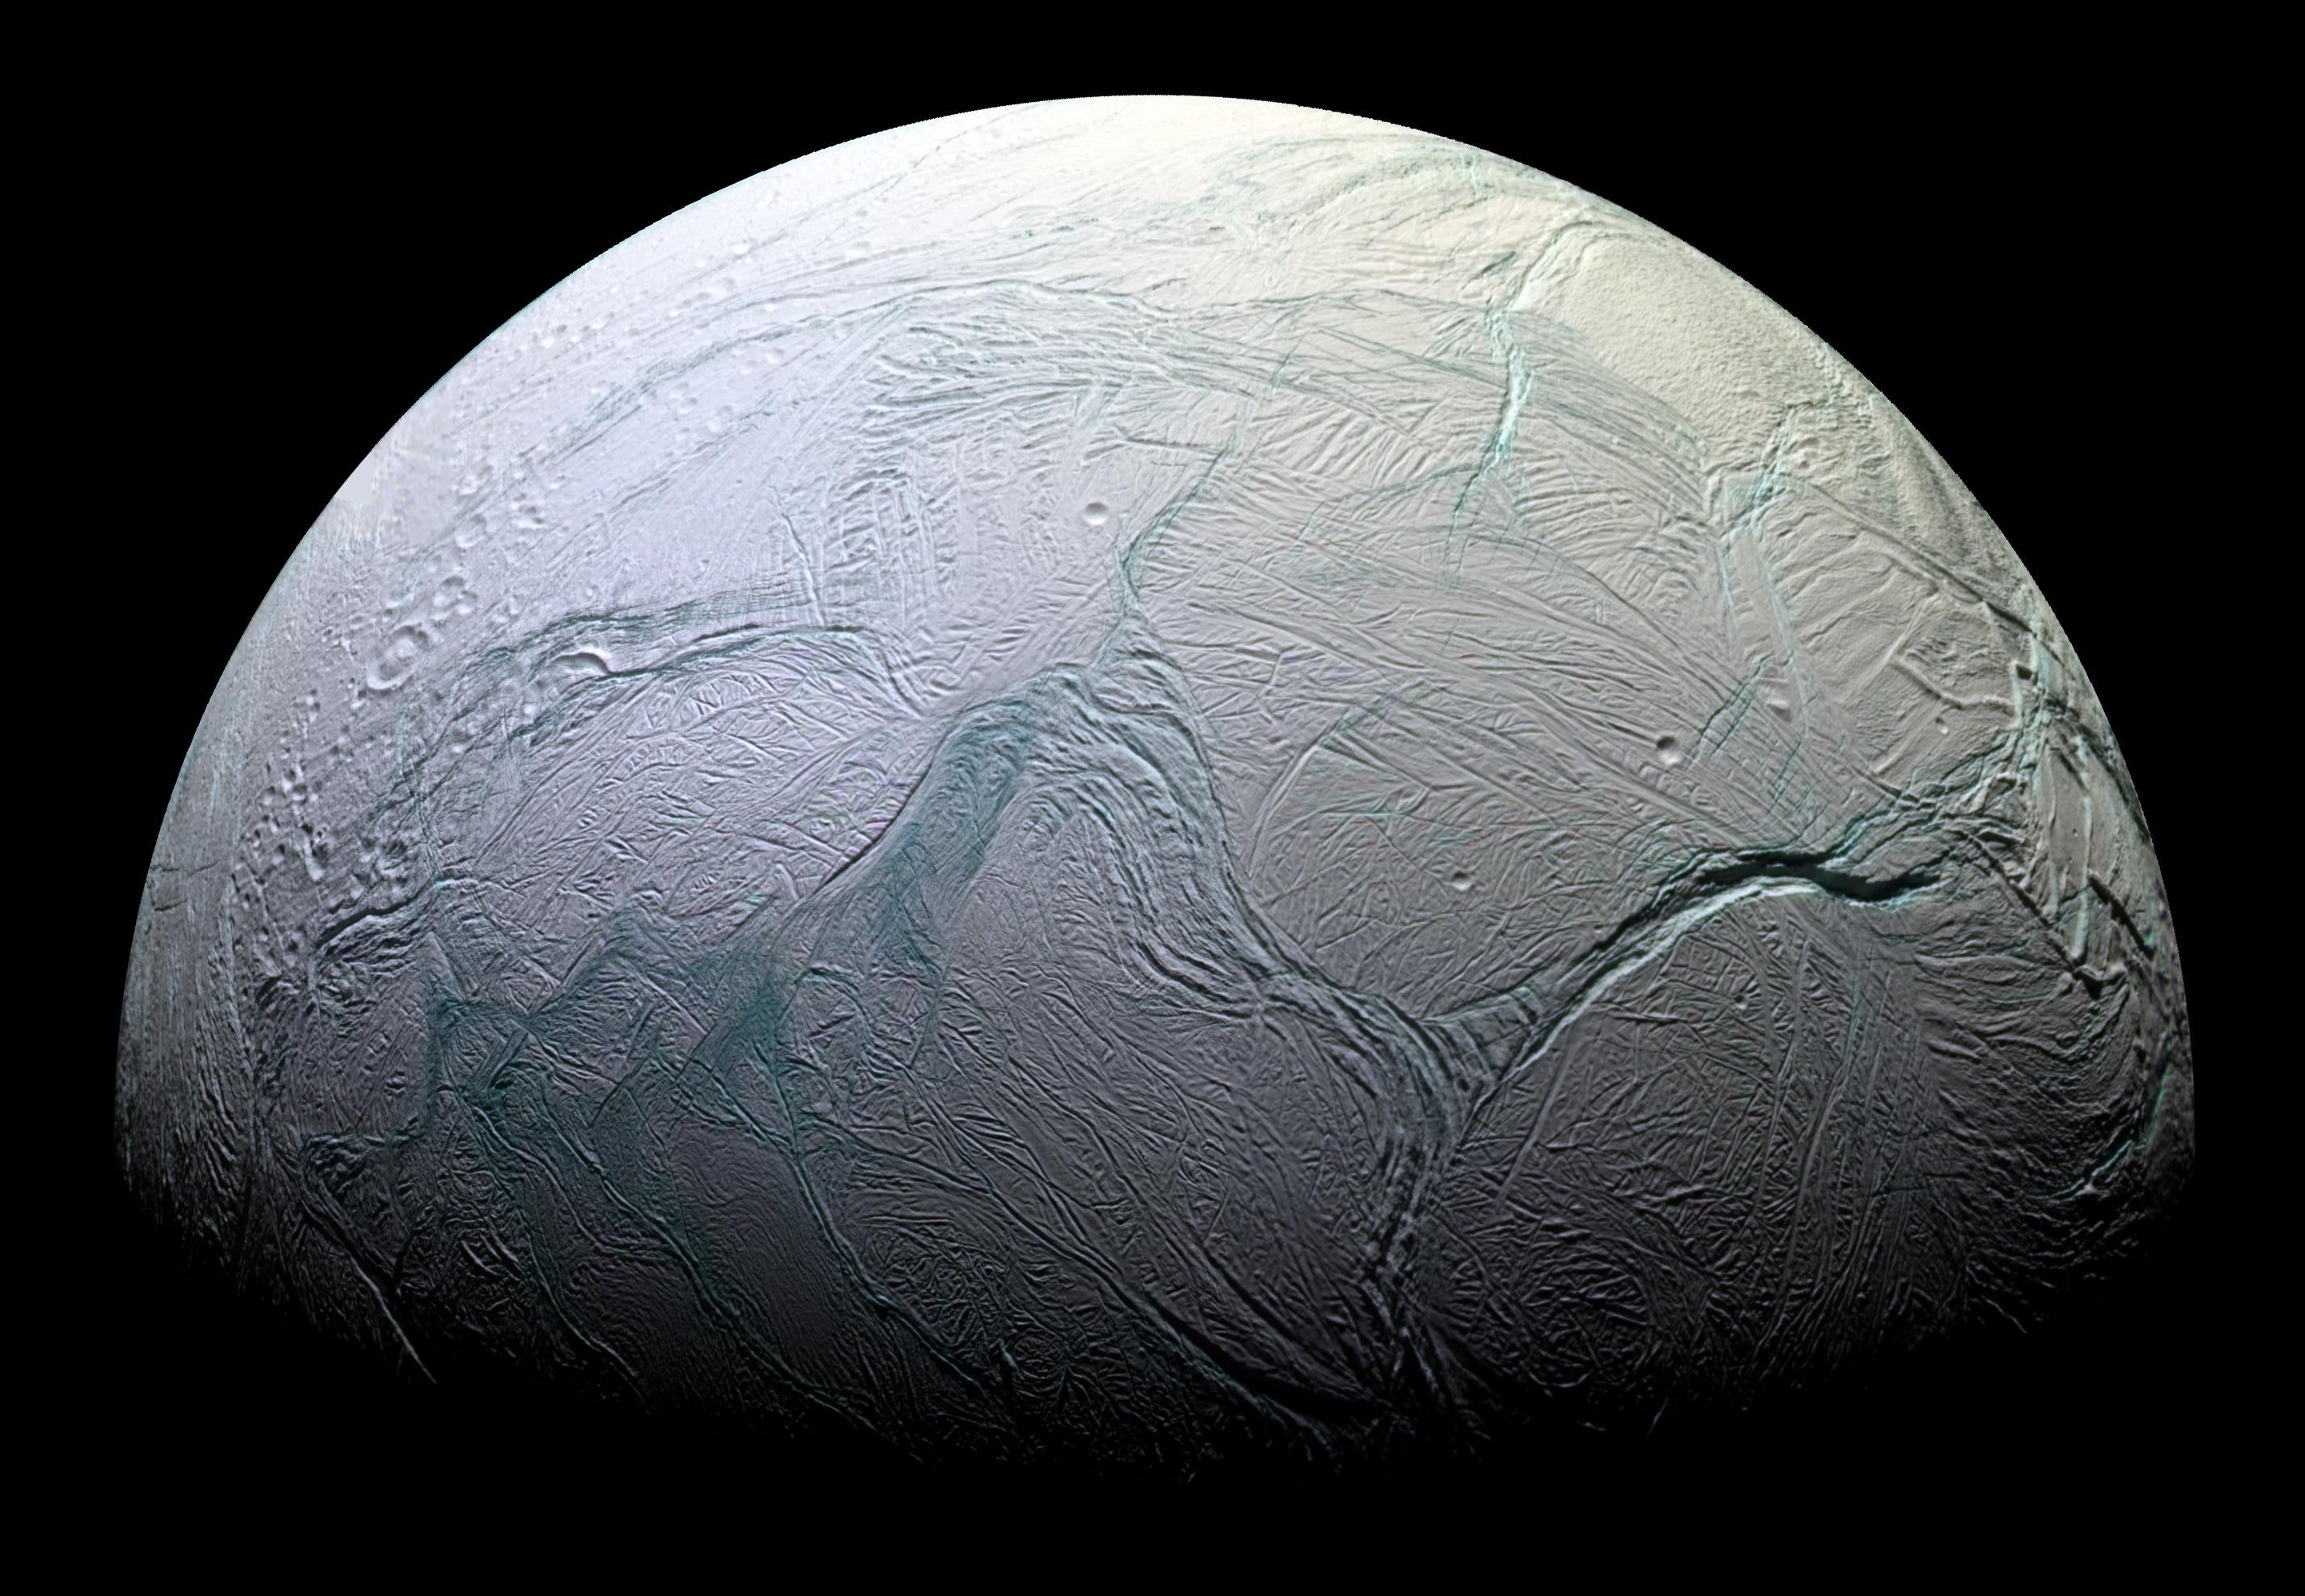 The “perfect age” for life: Saturn’s moon Enceladus hides an ocean ripe enough to sustain life